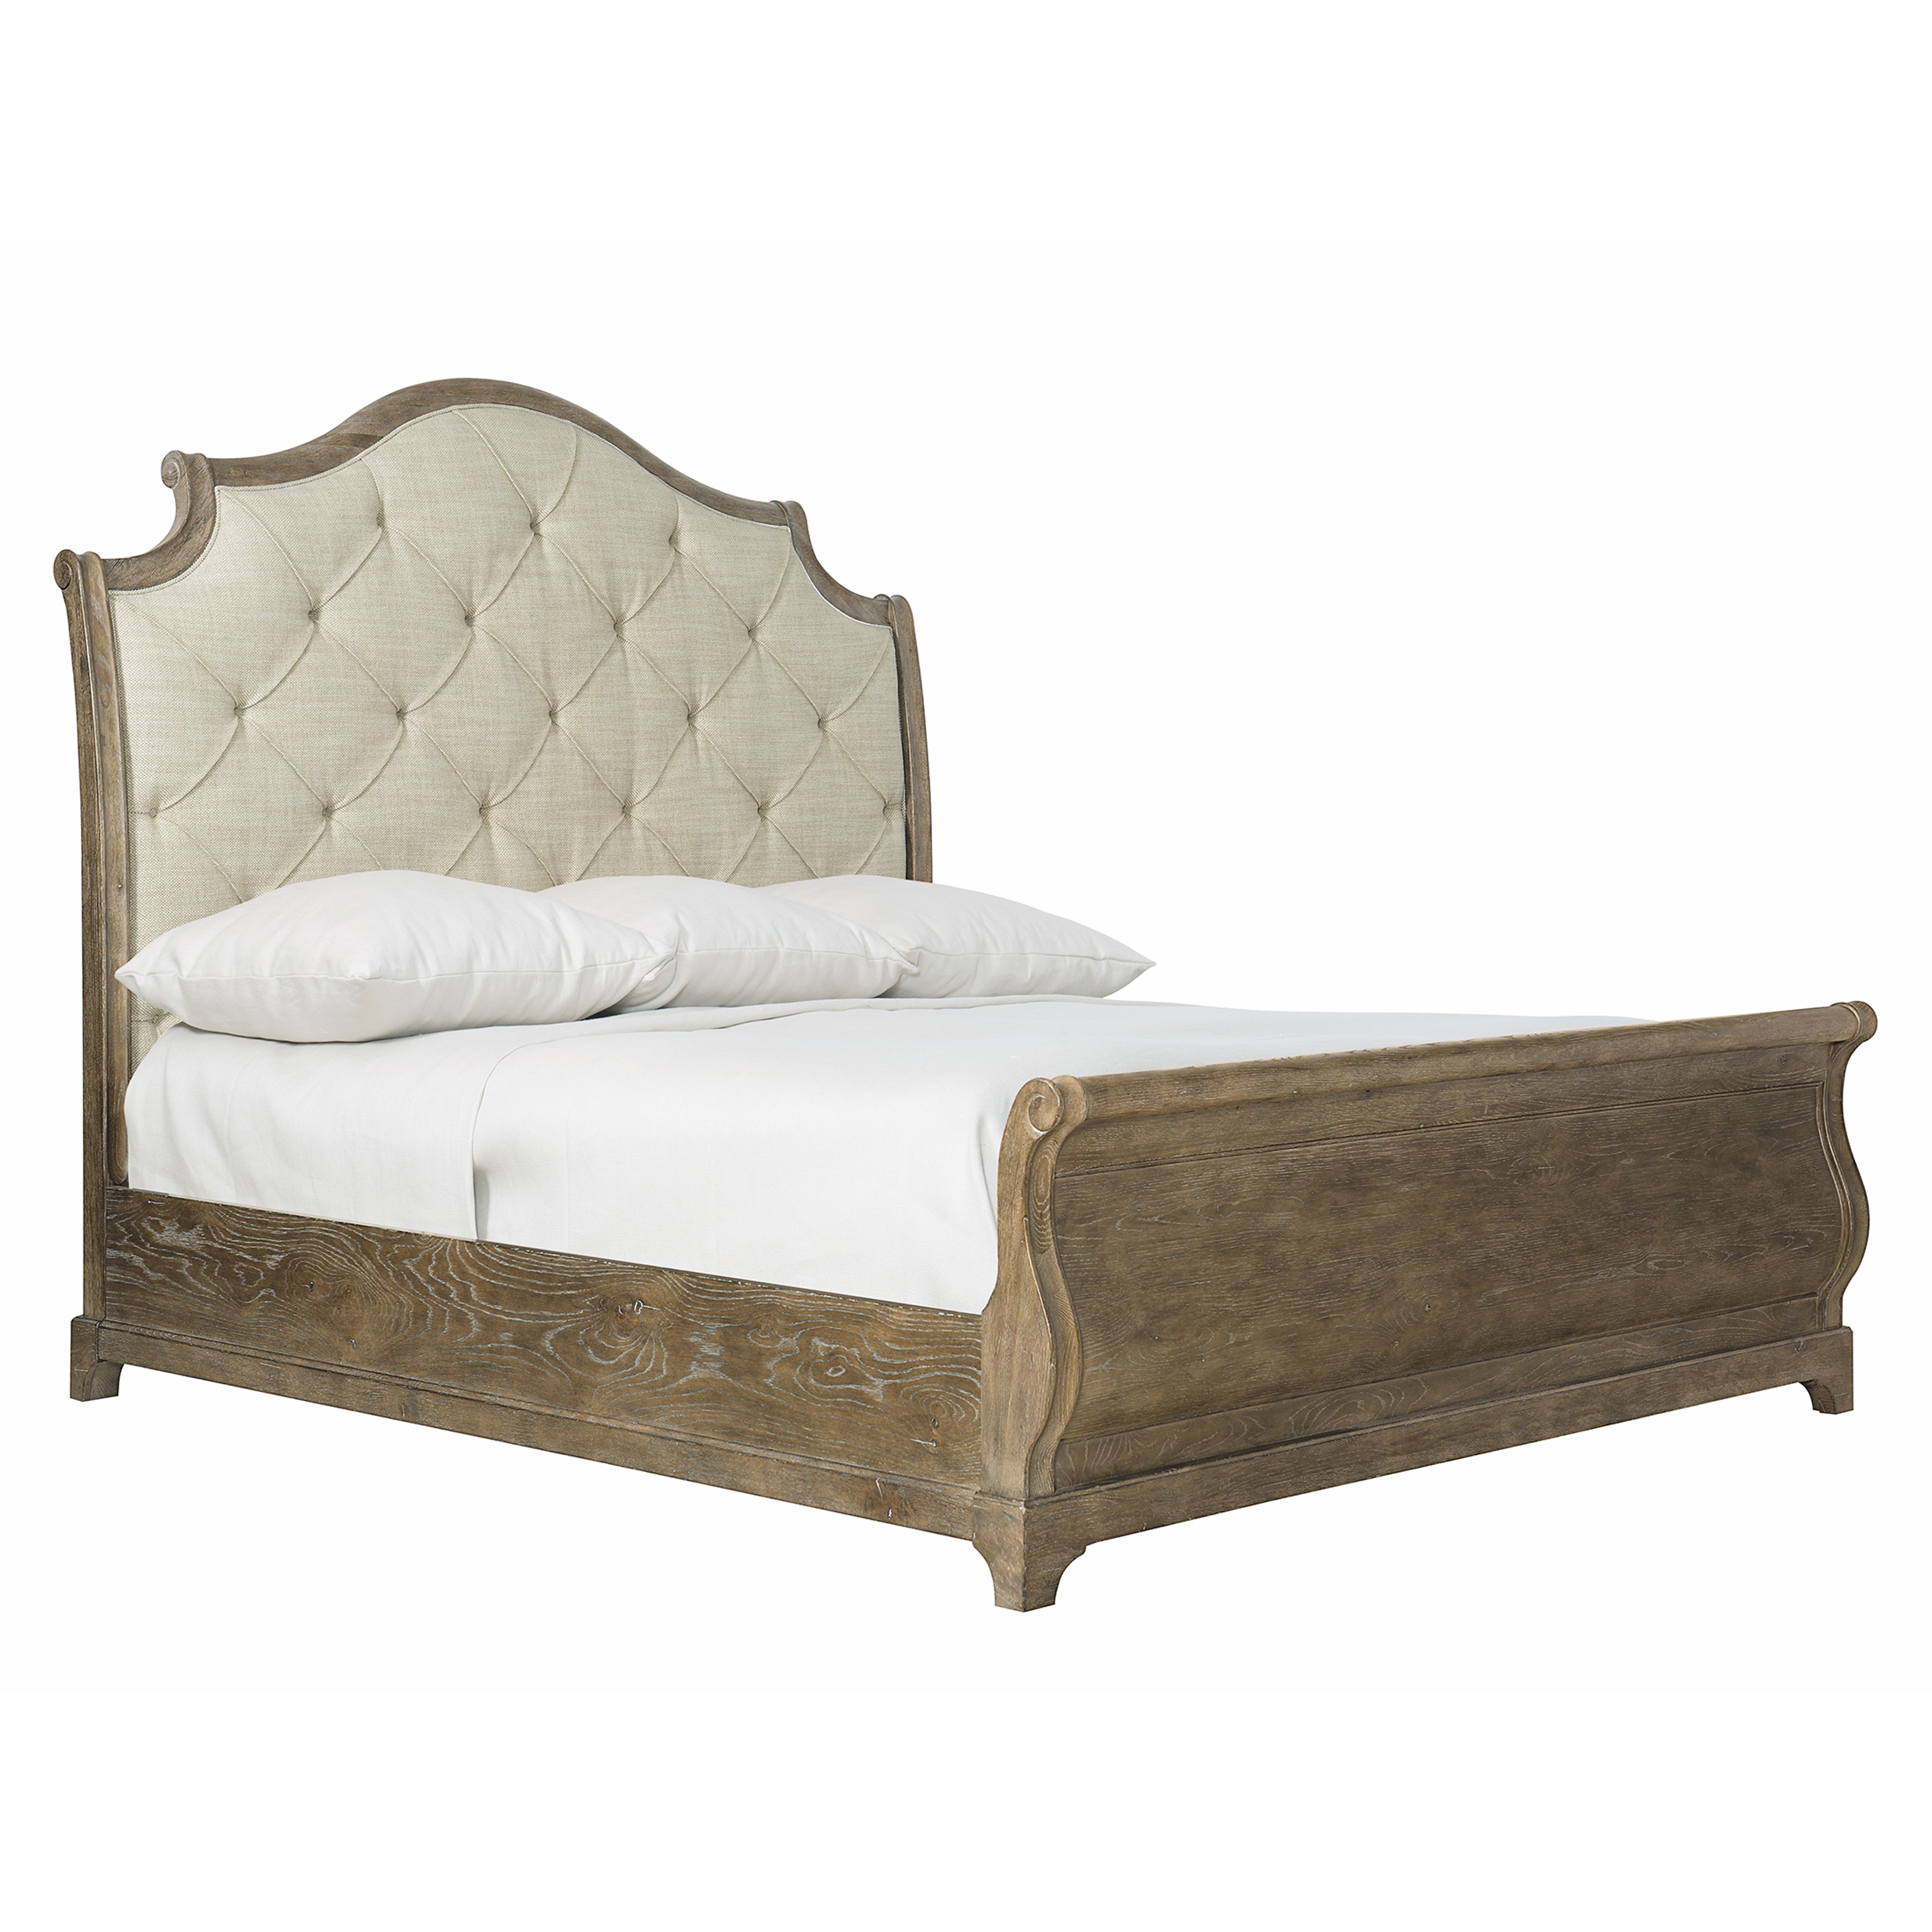 Rustic Patina Upholstered King Sleigh Bed in Peppercorn Finish